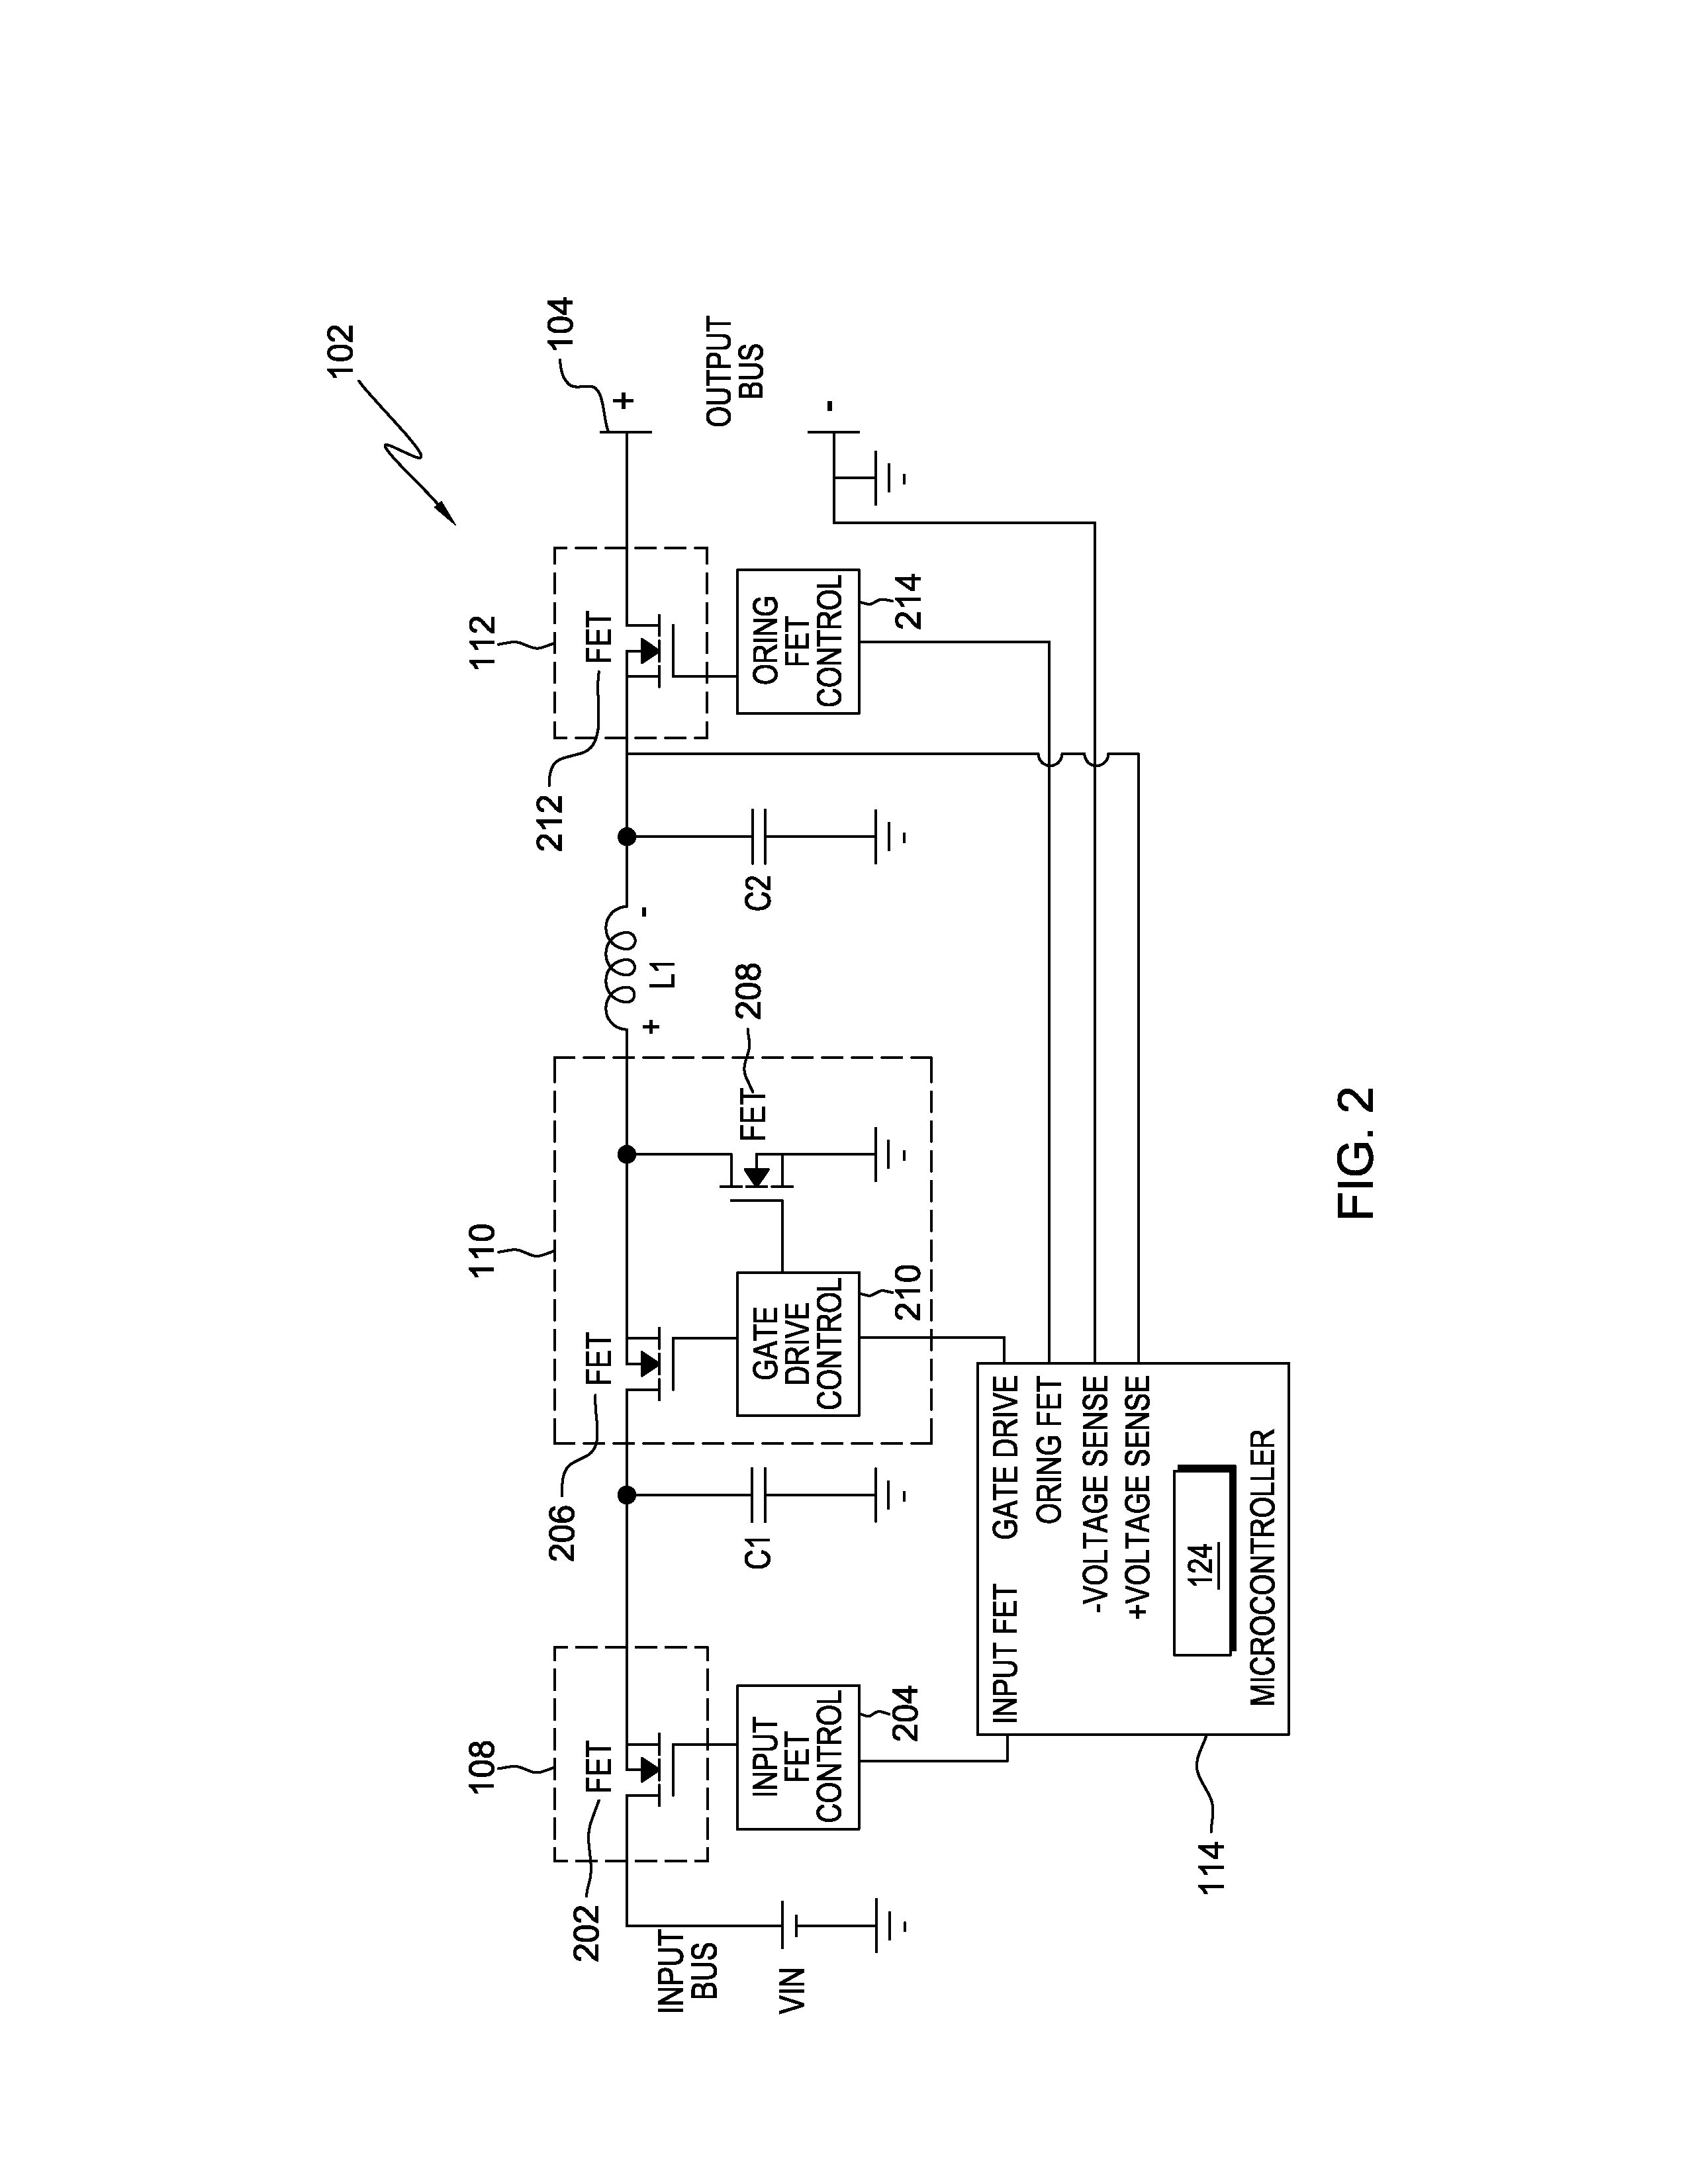 Testing protection schemes of a power converter